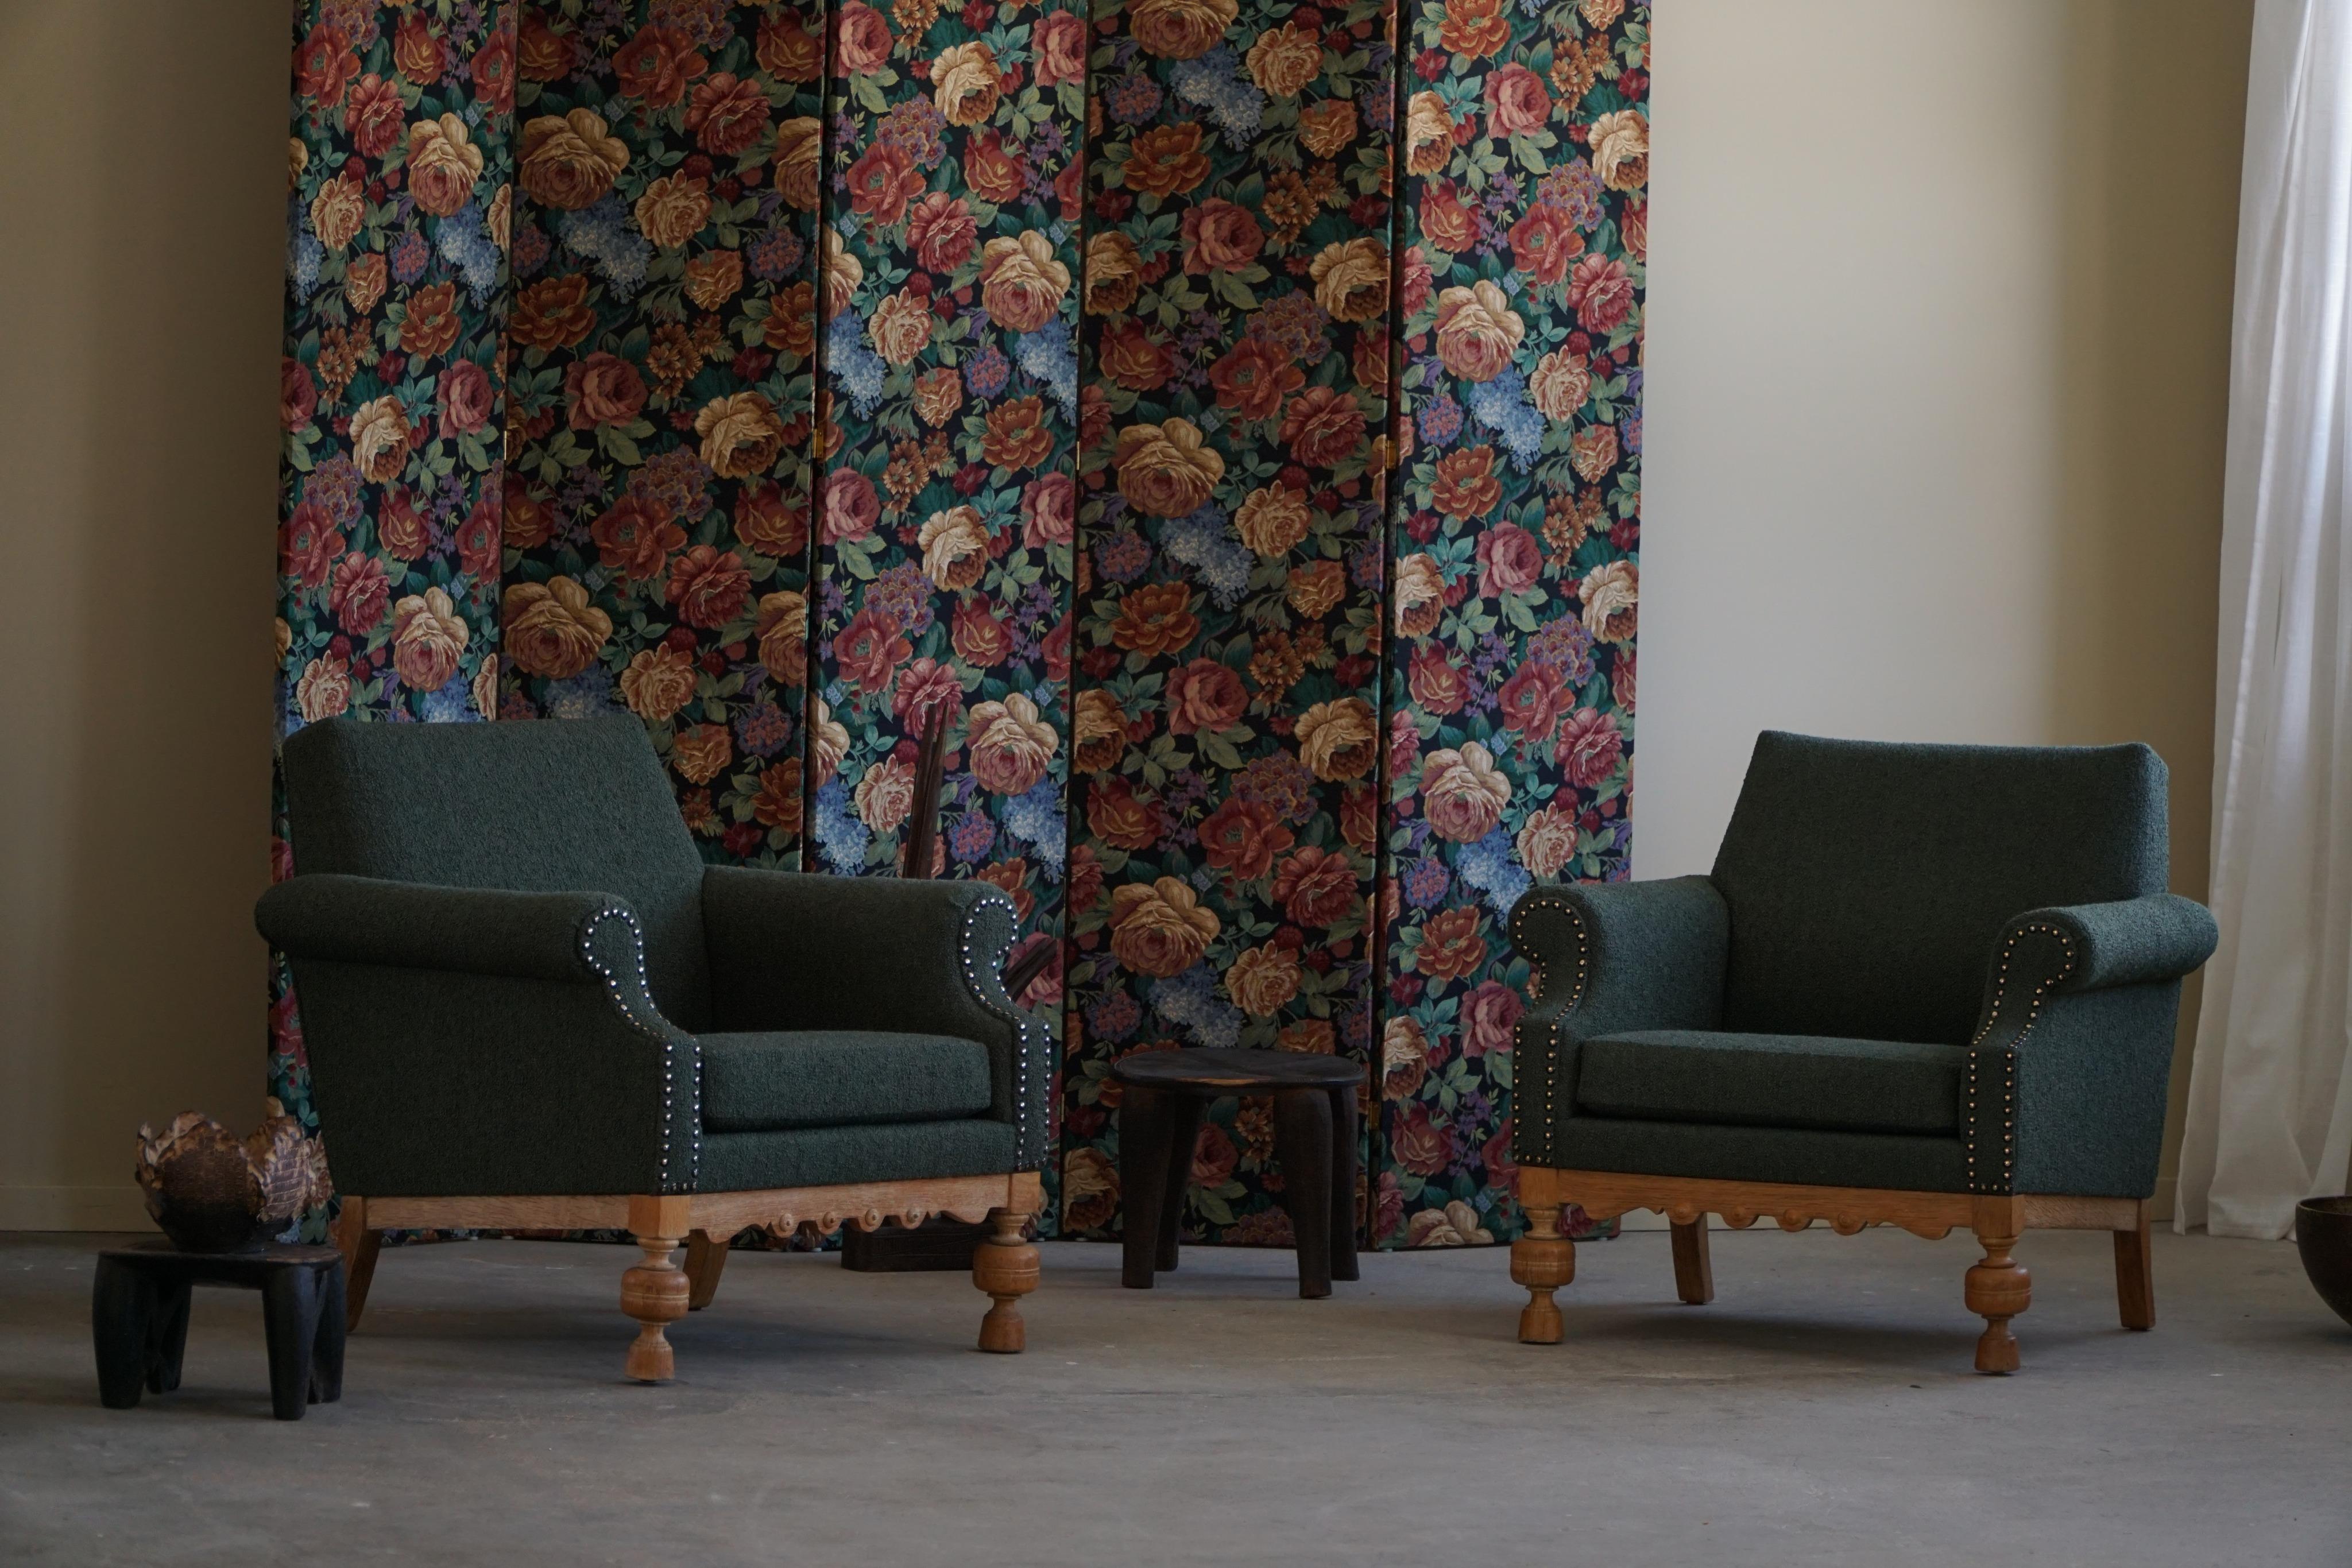 Embrace the timeless elegance of Danish Mid-Century Modern design with this exquisite pair of lounge chairs, crafted in the 1950s by a skillful carpenter. Expertly constructed from solid oak, the chairs feature gracefully turned legs. The warm and